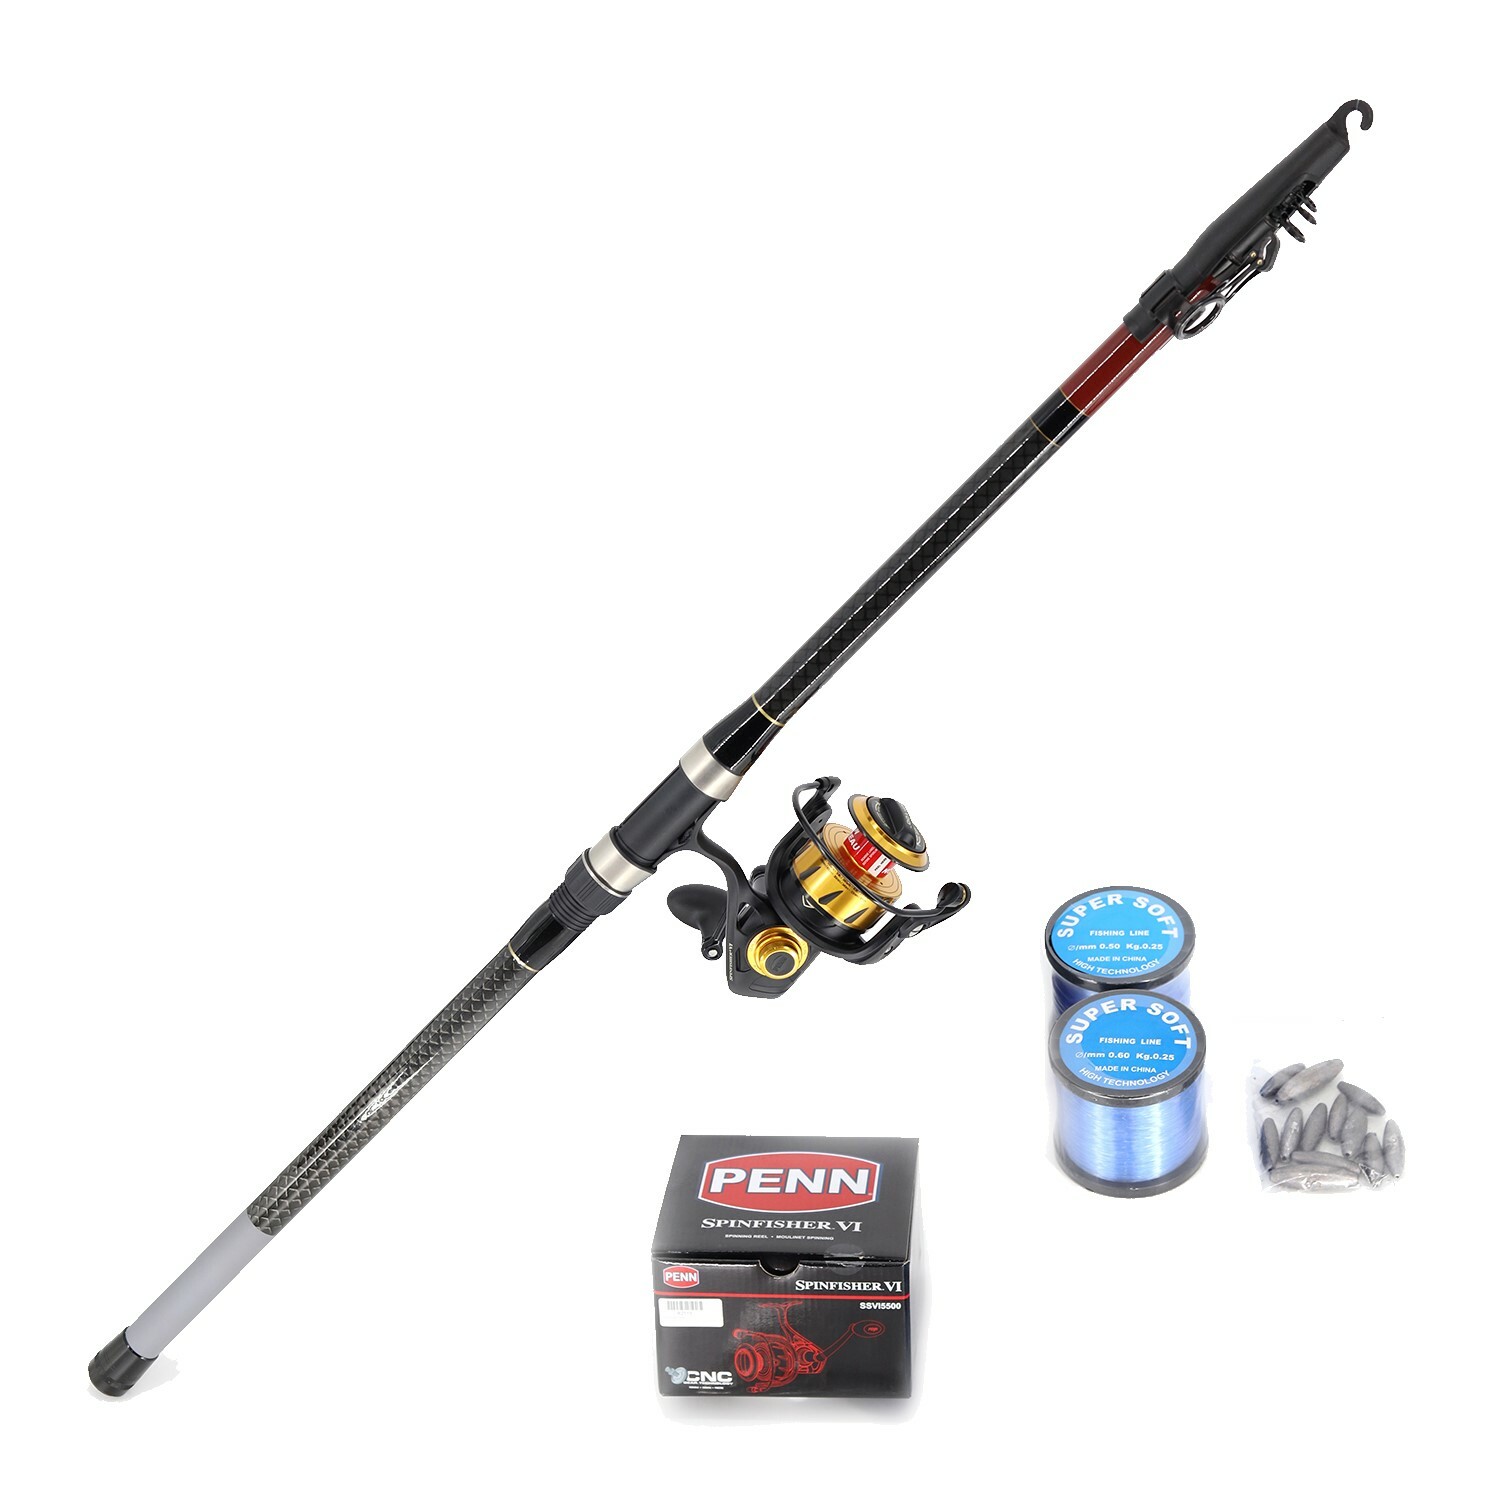 Shore Fishing (Pilot 3.6m and Penn VI 5500 including Nylon line with rigs and sinkers and snap swivels) Combo